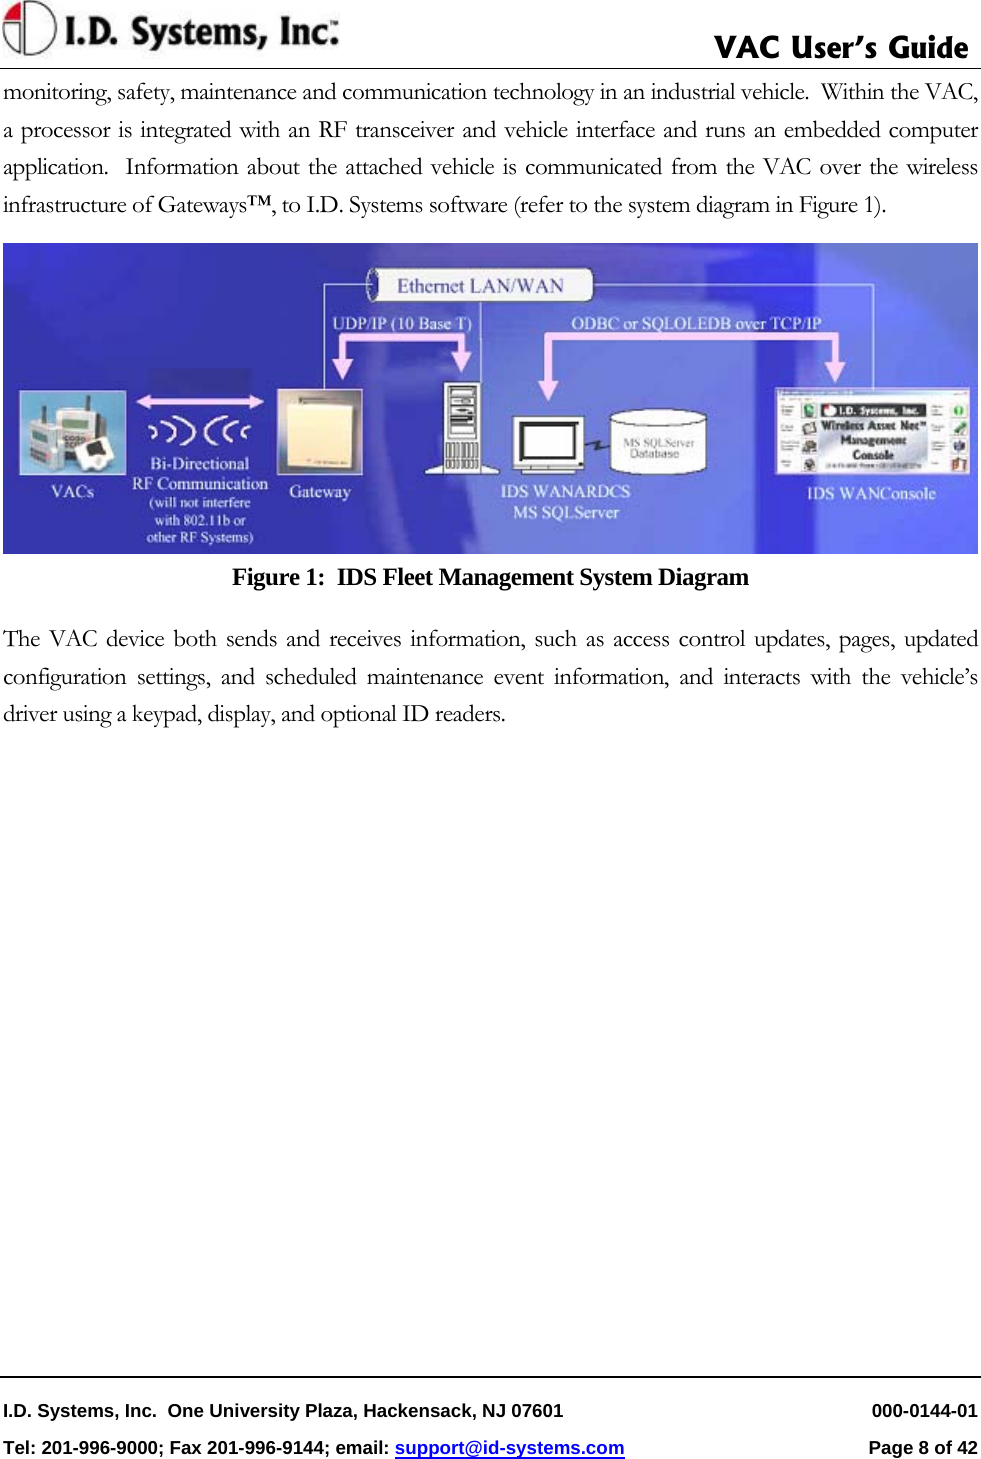     VAC User’s Guide I.D. Systems, Inc.  One University Plaza, Hackensack, NJ 07601   000-0144-01 Tel: 201-996-9000; Fax 201-996-9144; email: support@id-systems.com  Page 8 of 42   monitoring, safety, maintenance and communication technology in an industrial vehicle.  Within the VAC, a processor is integrated with an RF transceiver and vehicle interface and runs an embedded computer application.  Information about the attached vehicle is communicated from the VAC over the wireless infrastructure of Gateways™, to I.D. Systems software (refer to the system diagram in Figure 1).   Figure 1:  IDS Fleet Management System Diagram The VAC device both sends and receives information, such as access control updates, pages, updated configuration settings, and scheduled maintenance event information, and interacts with the vehicle’s driver using a keypad, display, and optional ID readers. 